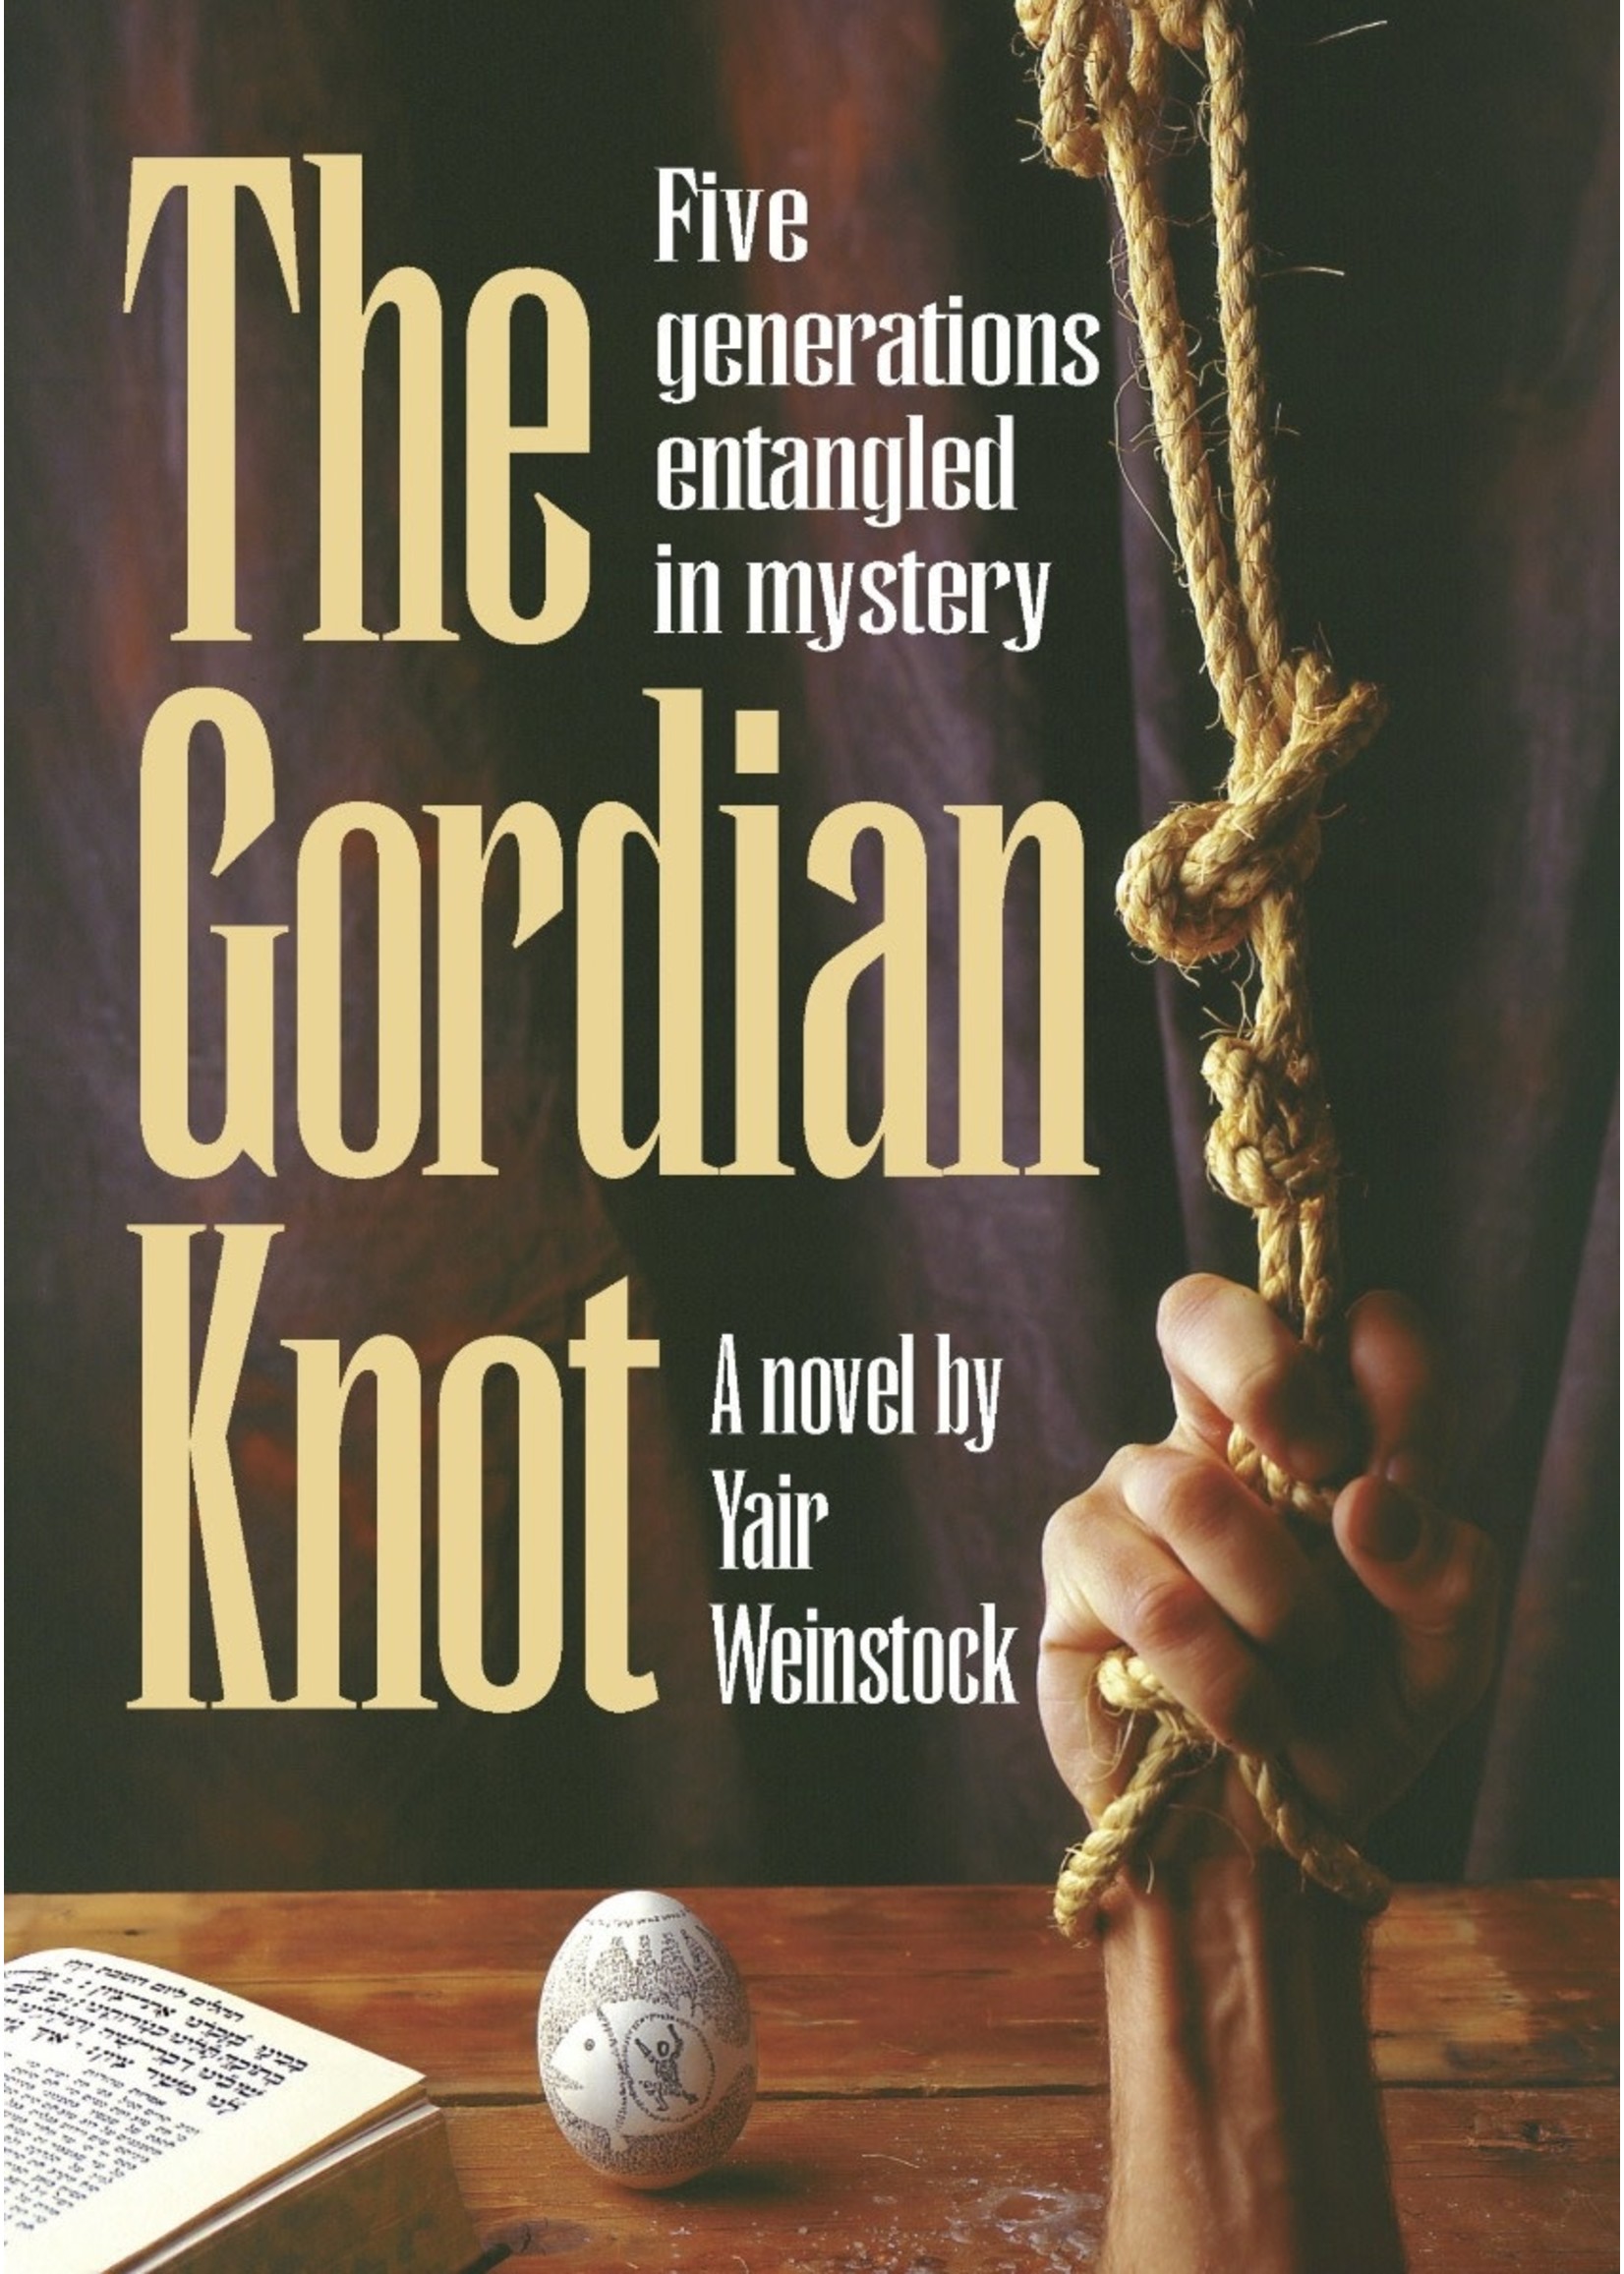 THE GORDIAN KNOT H/C